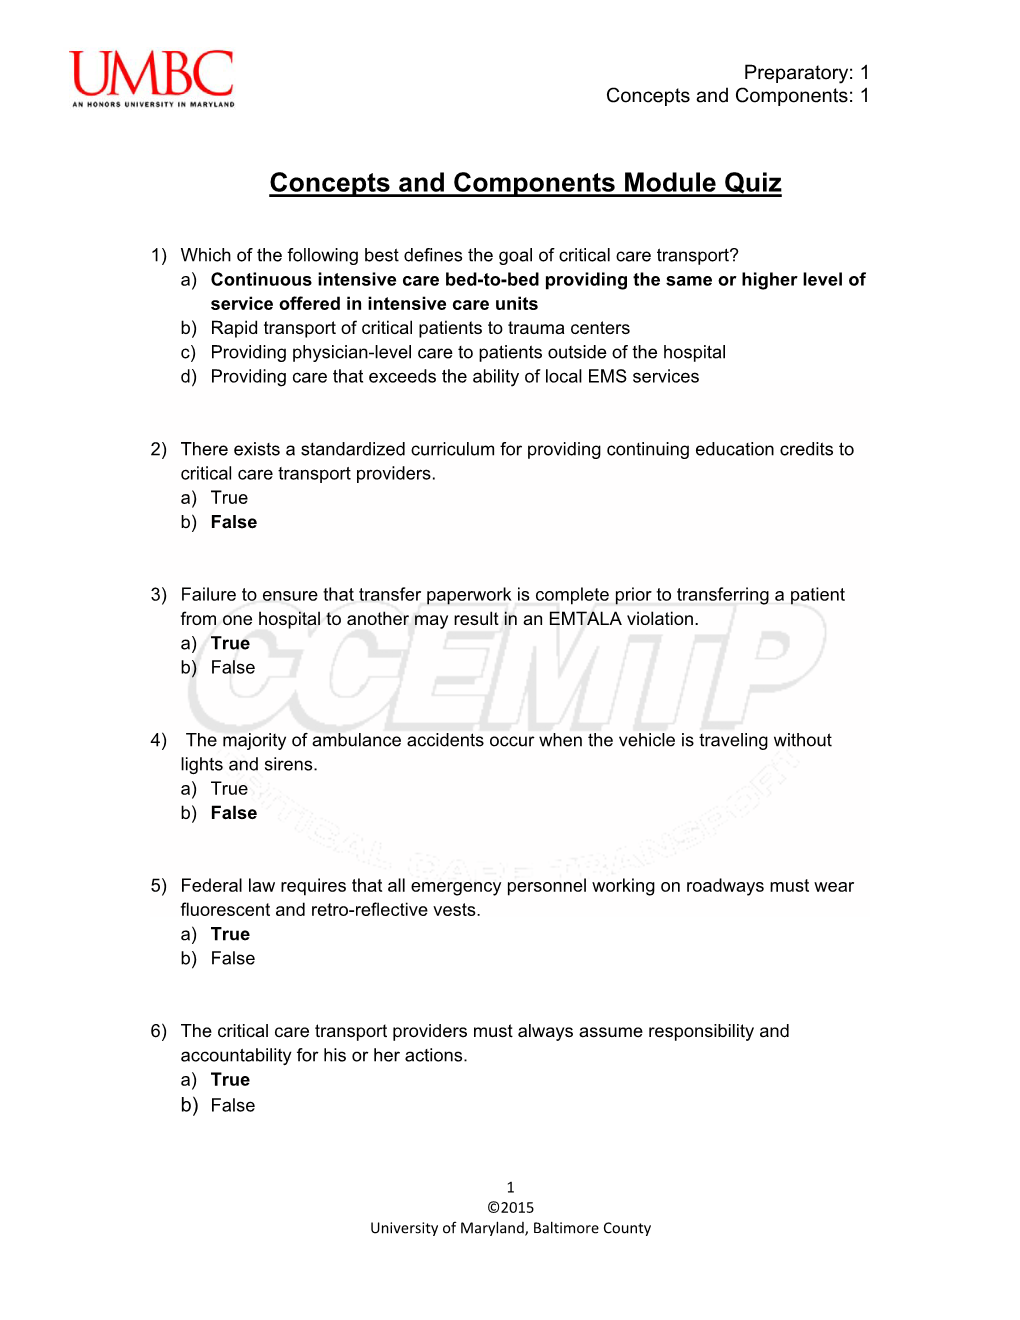 Concepts and Components Module Quiz